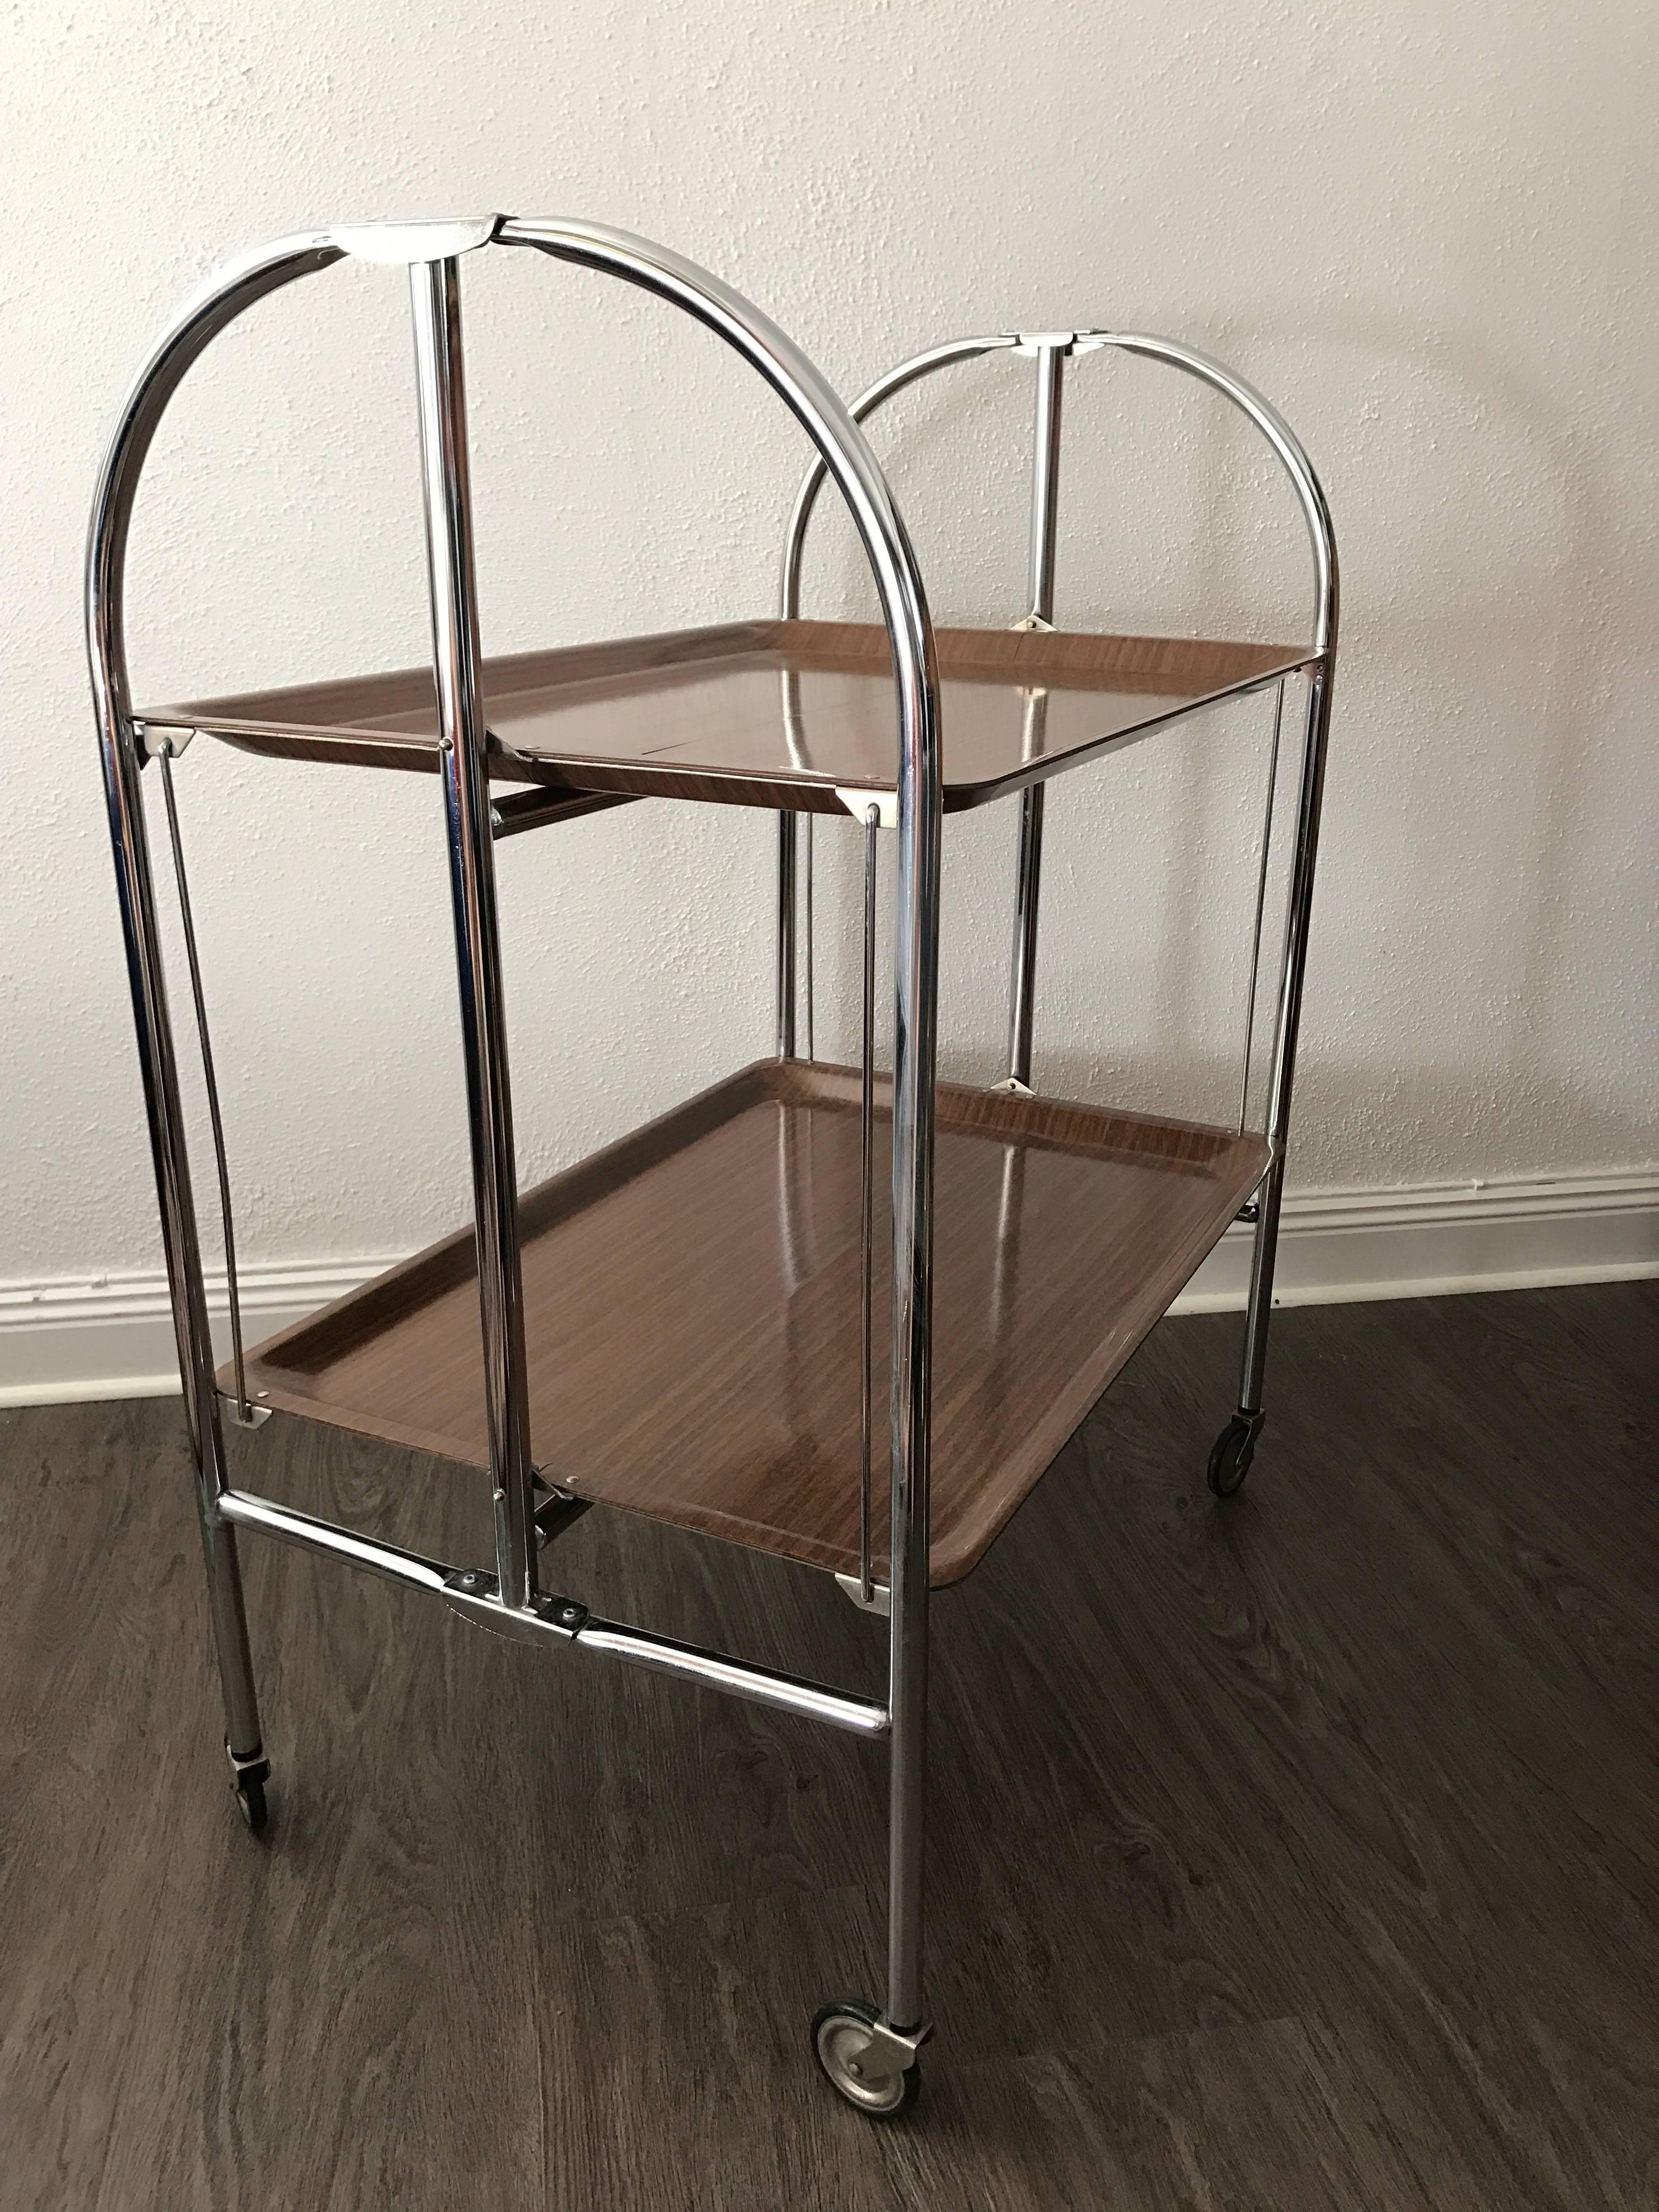 1950 Swedish chrome and laminate folding serving cart.
A very smart and easy folding serving cart in original condition, very easy to tuck away when having limited space. The trays are made of high pressure laminate and the tubes are made of chrome